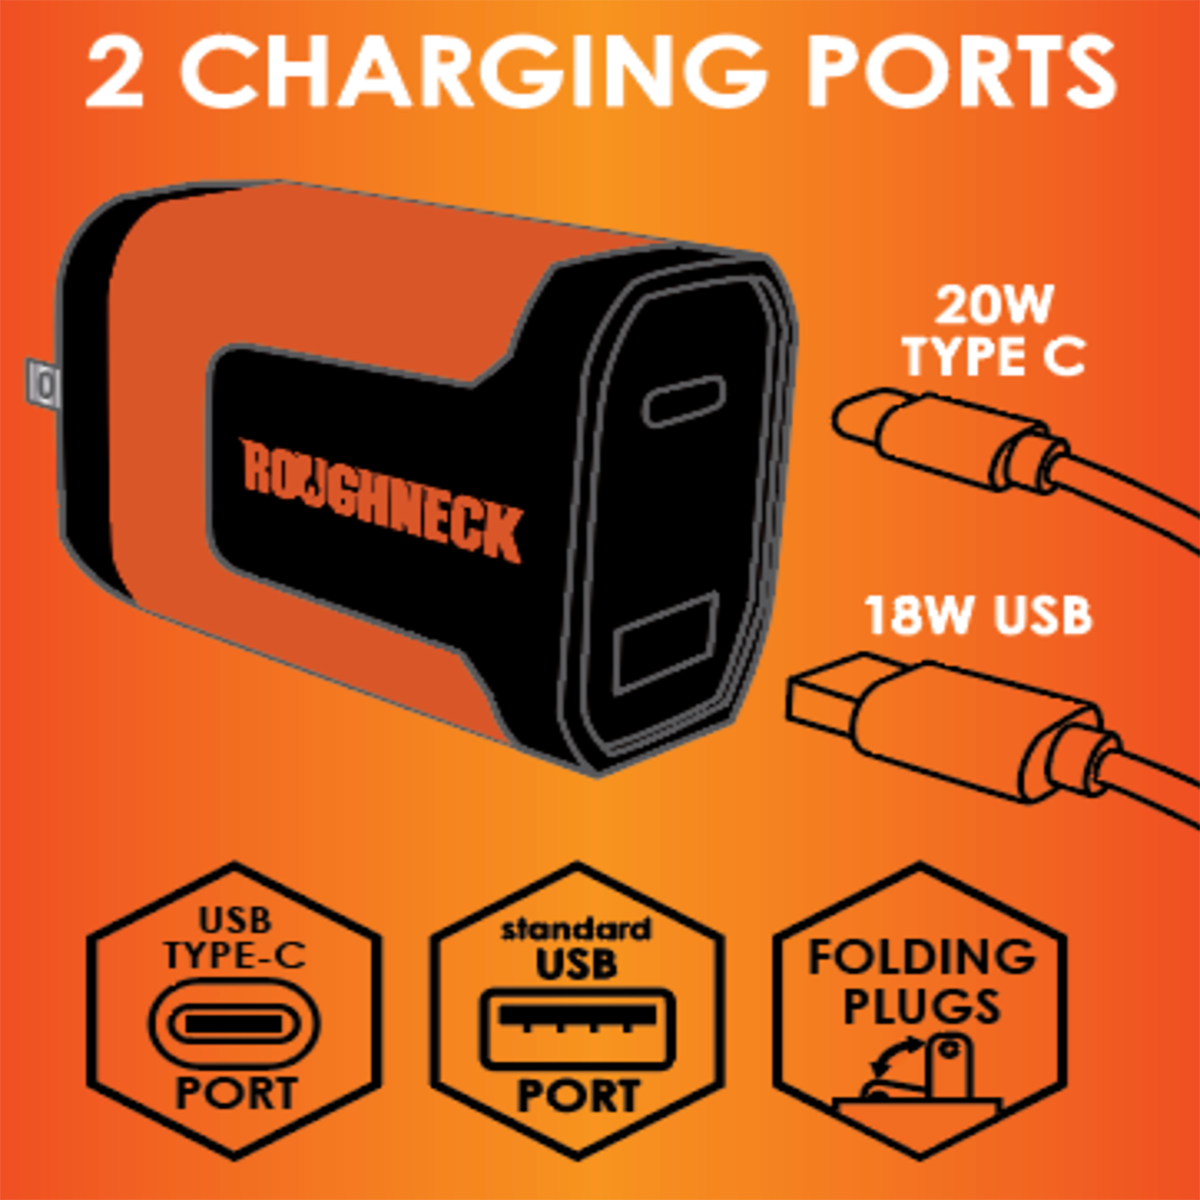 WHOLESALE 20W USB-A AND USB-C DUAL PORT AC WALL CHARGER 3 PIECES PER PACK 24585